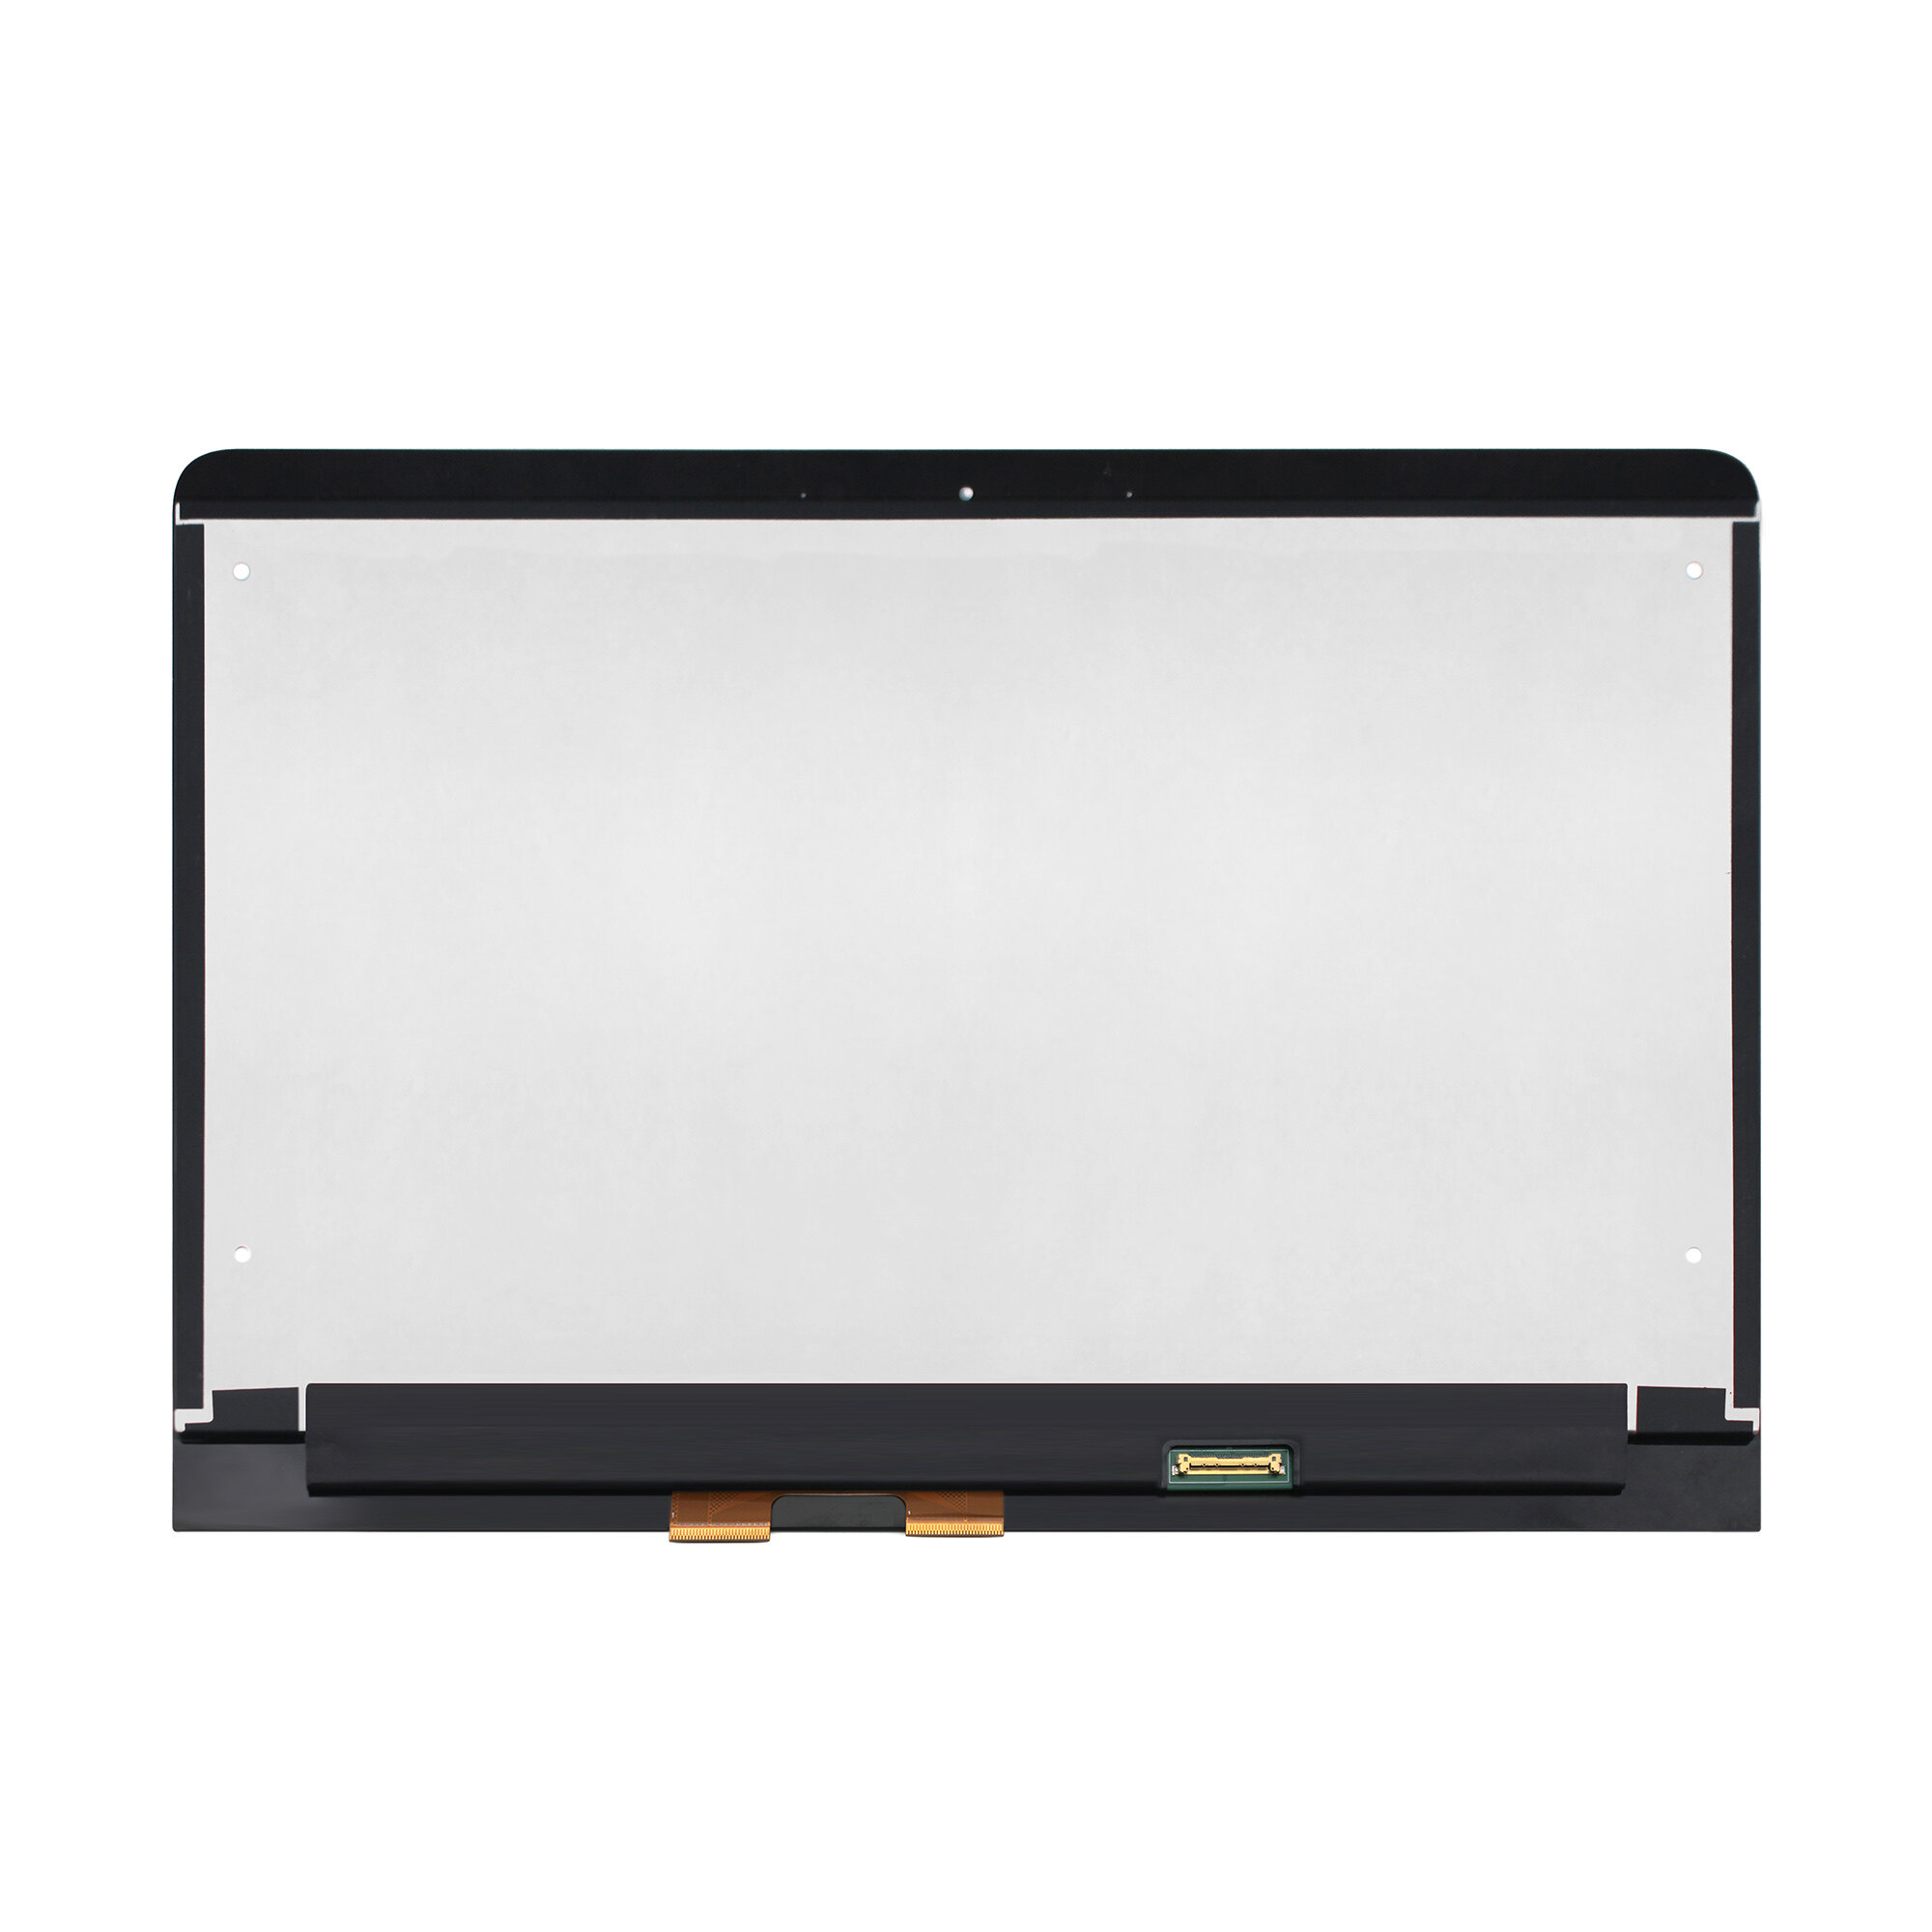 13.3" FHD LED LCD Touch Screen Digitizer Assembly For HP Spectre X360 13-AC023DX 918030-001